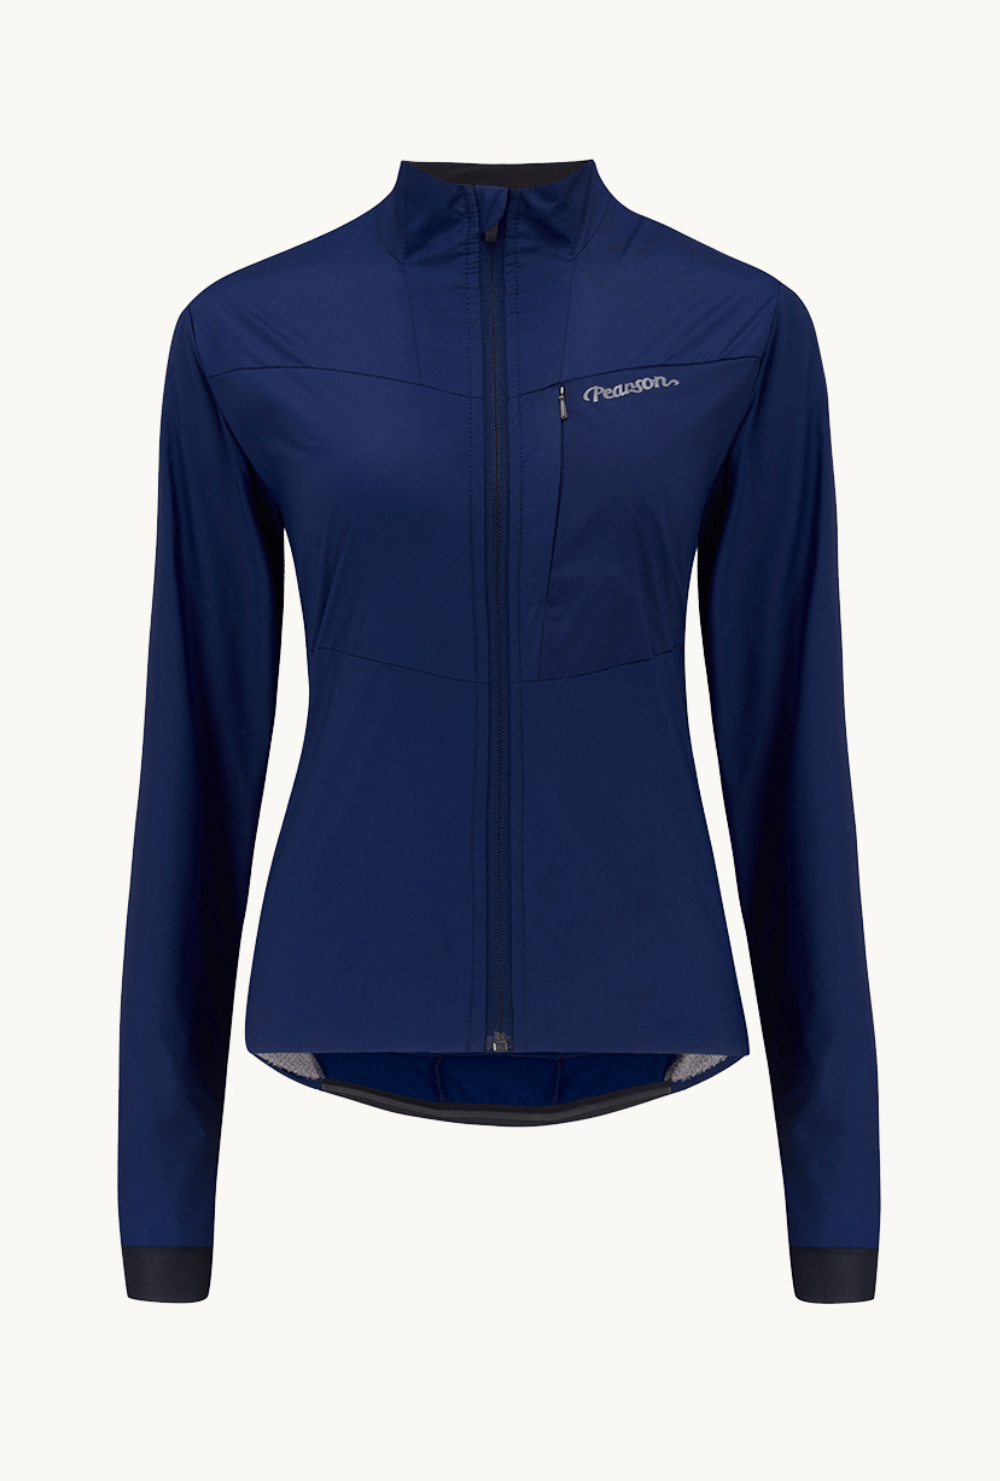 Pearson 1860  Test Your Mettle - Womens Road Insulated Jacket Blue Ink  Blue Ink / X-large